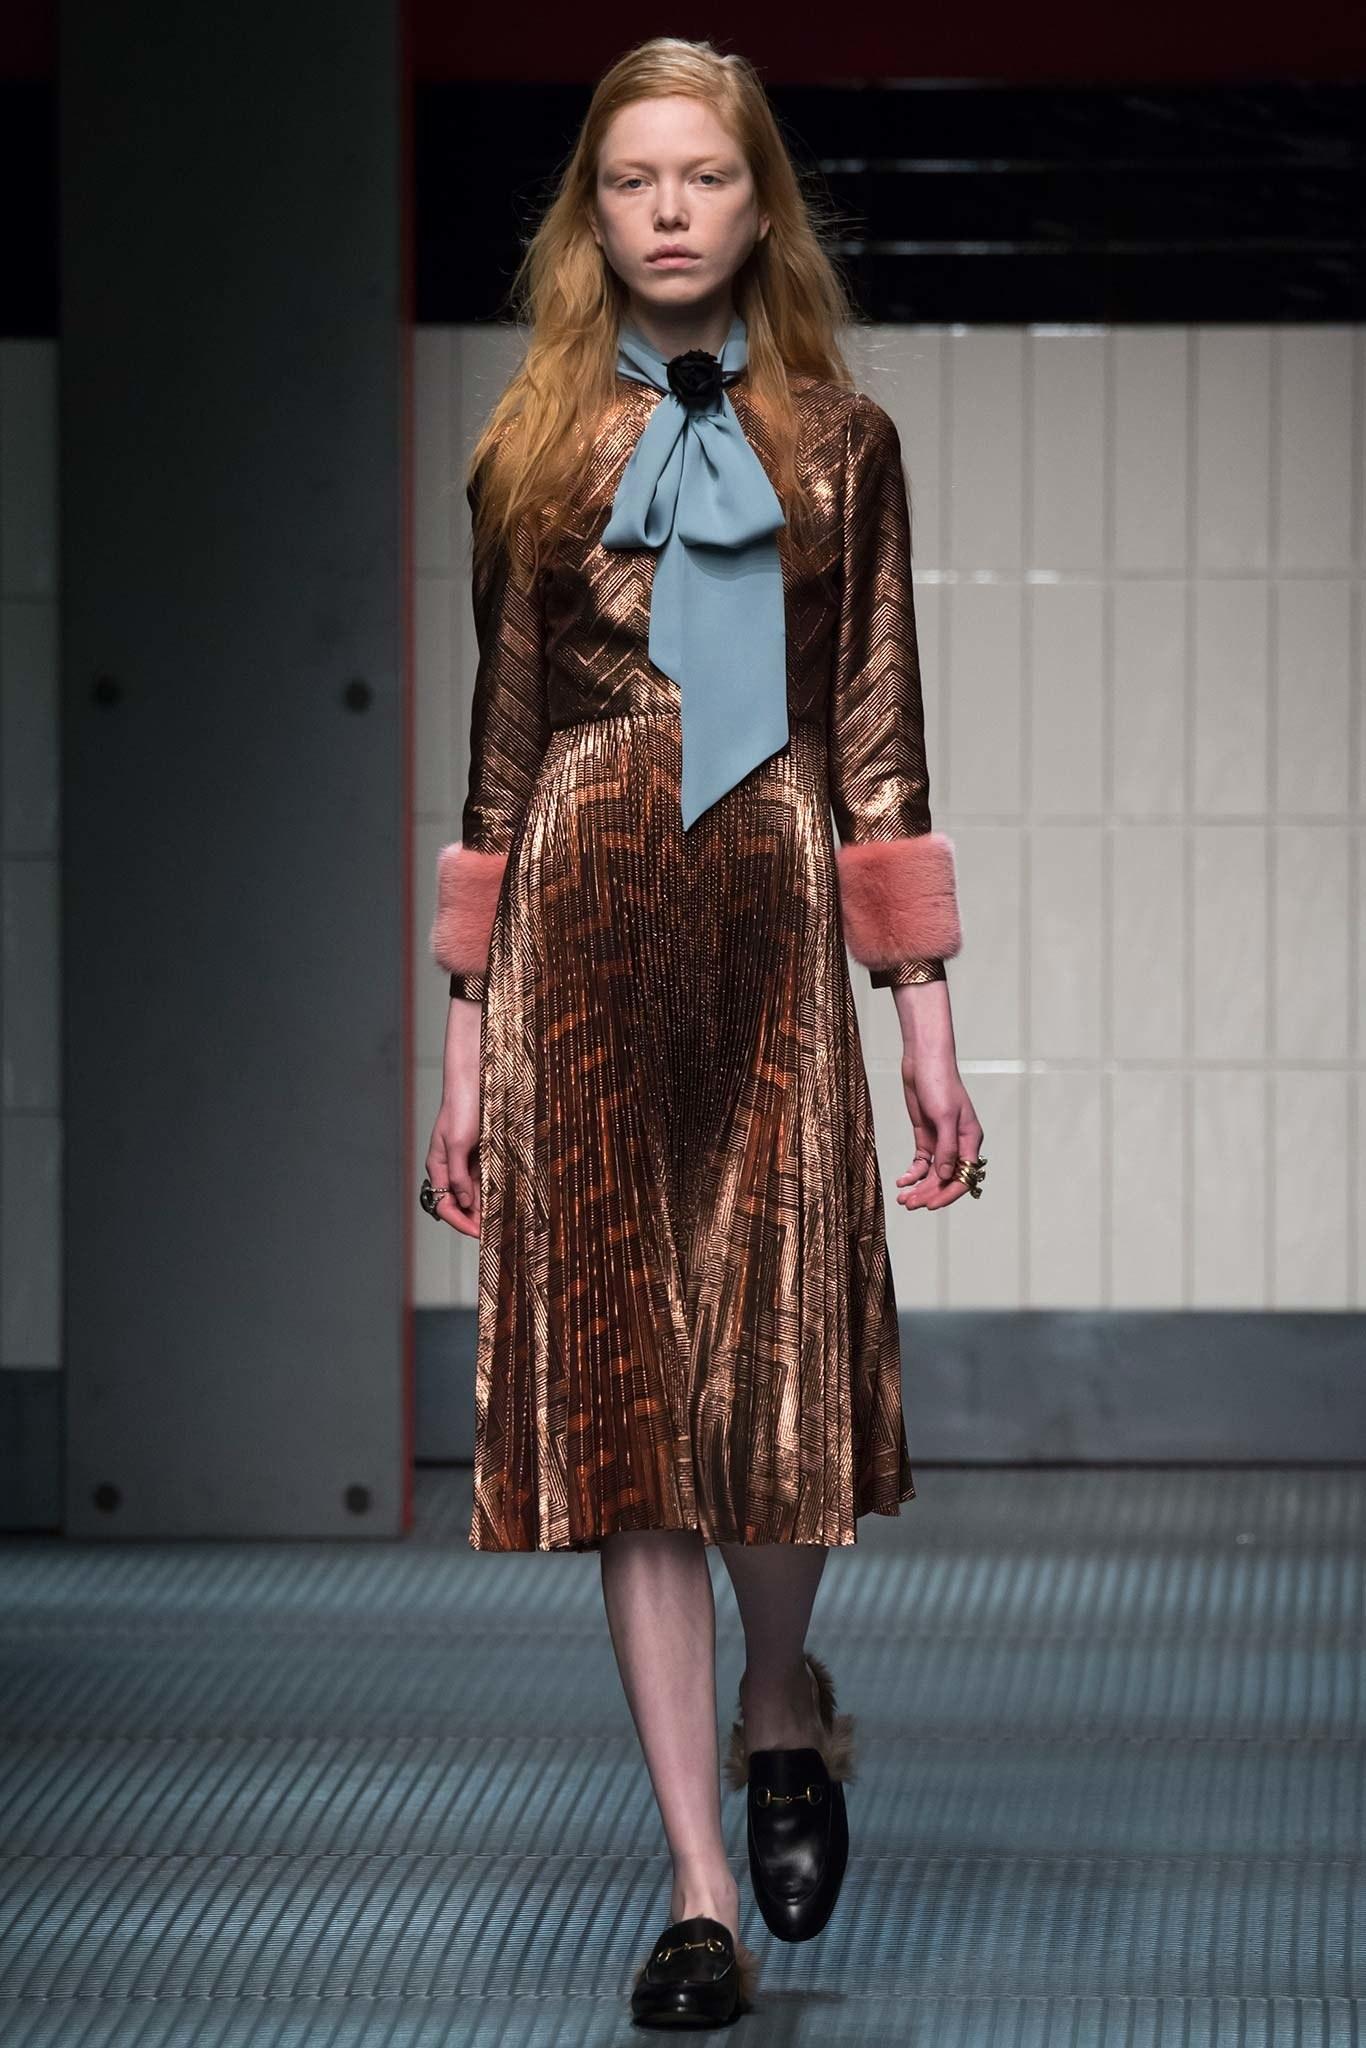 GUCCI cocktail dress comes in metallic rose gold zig zag print lurex fabric and features a light blue tied collar, three quarter sleeves with pink mink cuffs, and accordion pleated A line skirt. Minor disturbances in pleats on back. As-is. Made in